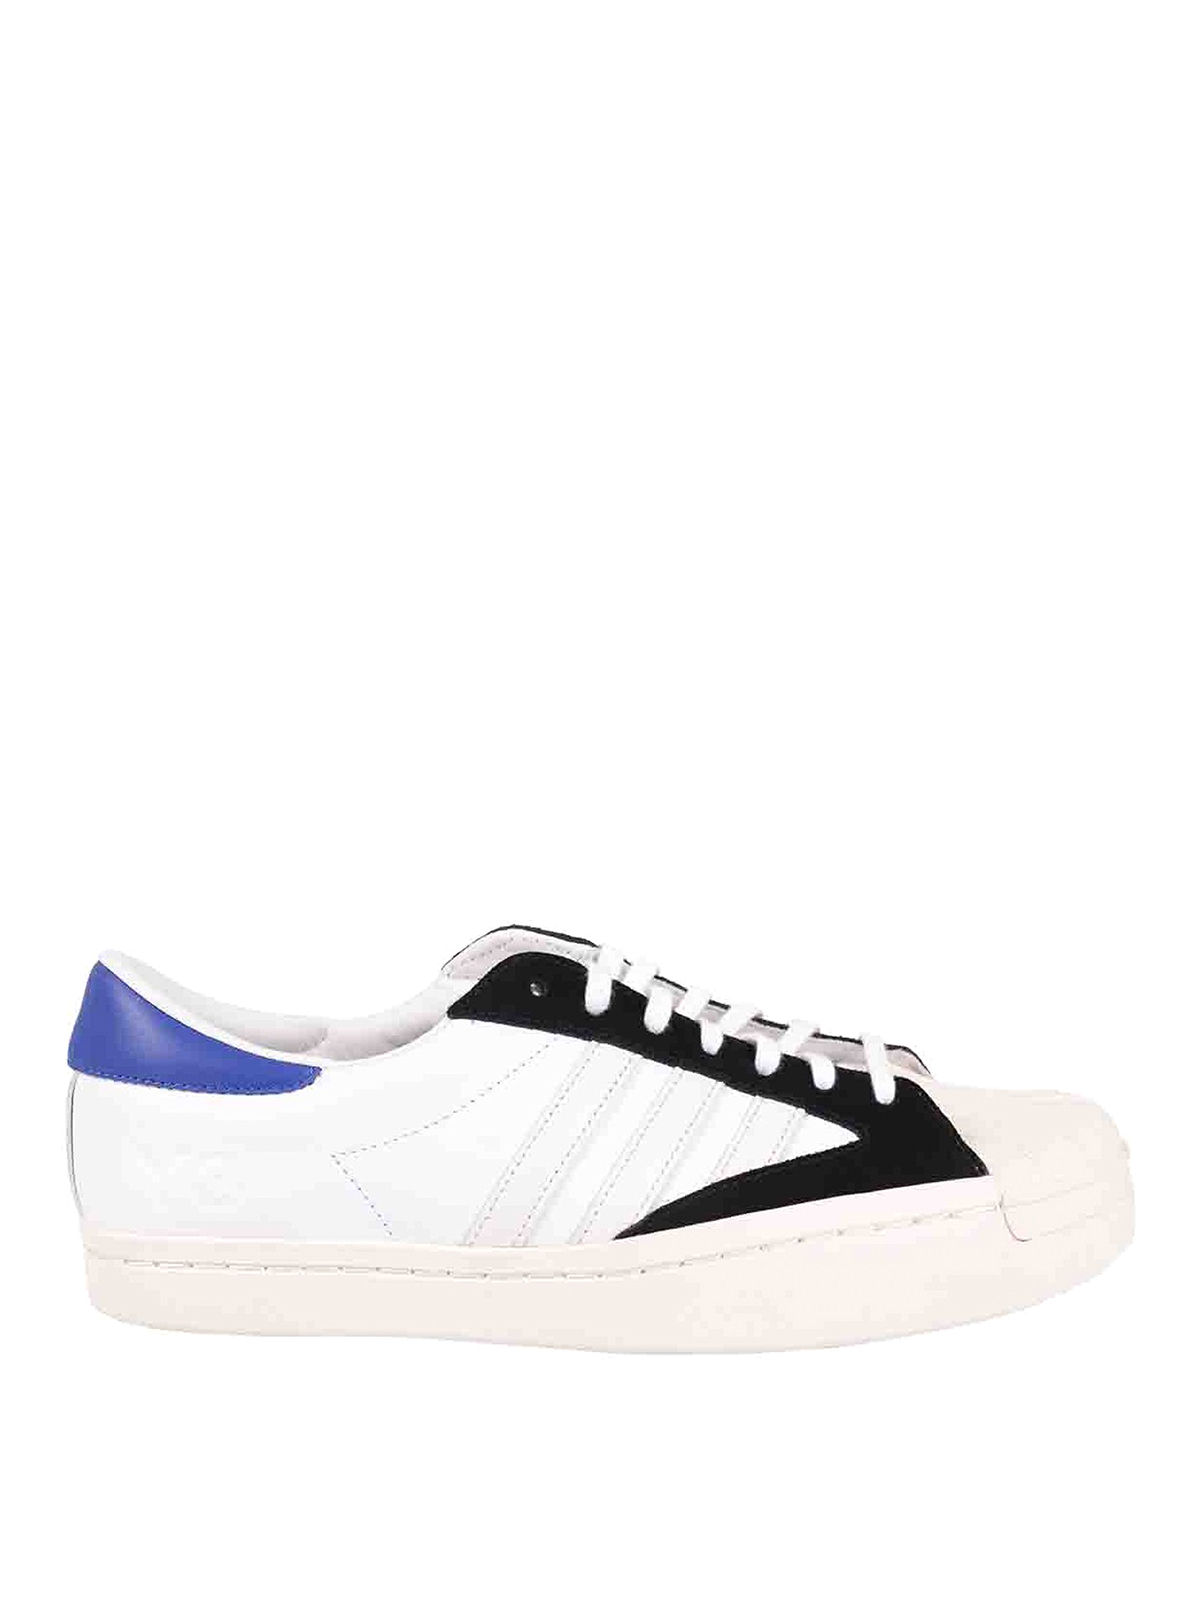 Trainers Y-3 - Yoshi Star sneakers - FX0895 | Shop online at iKRIX